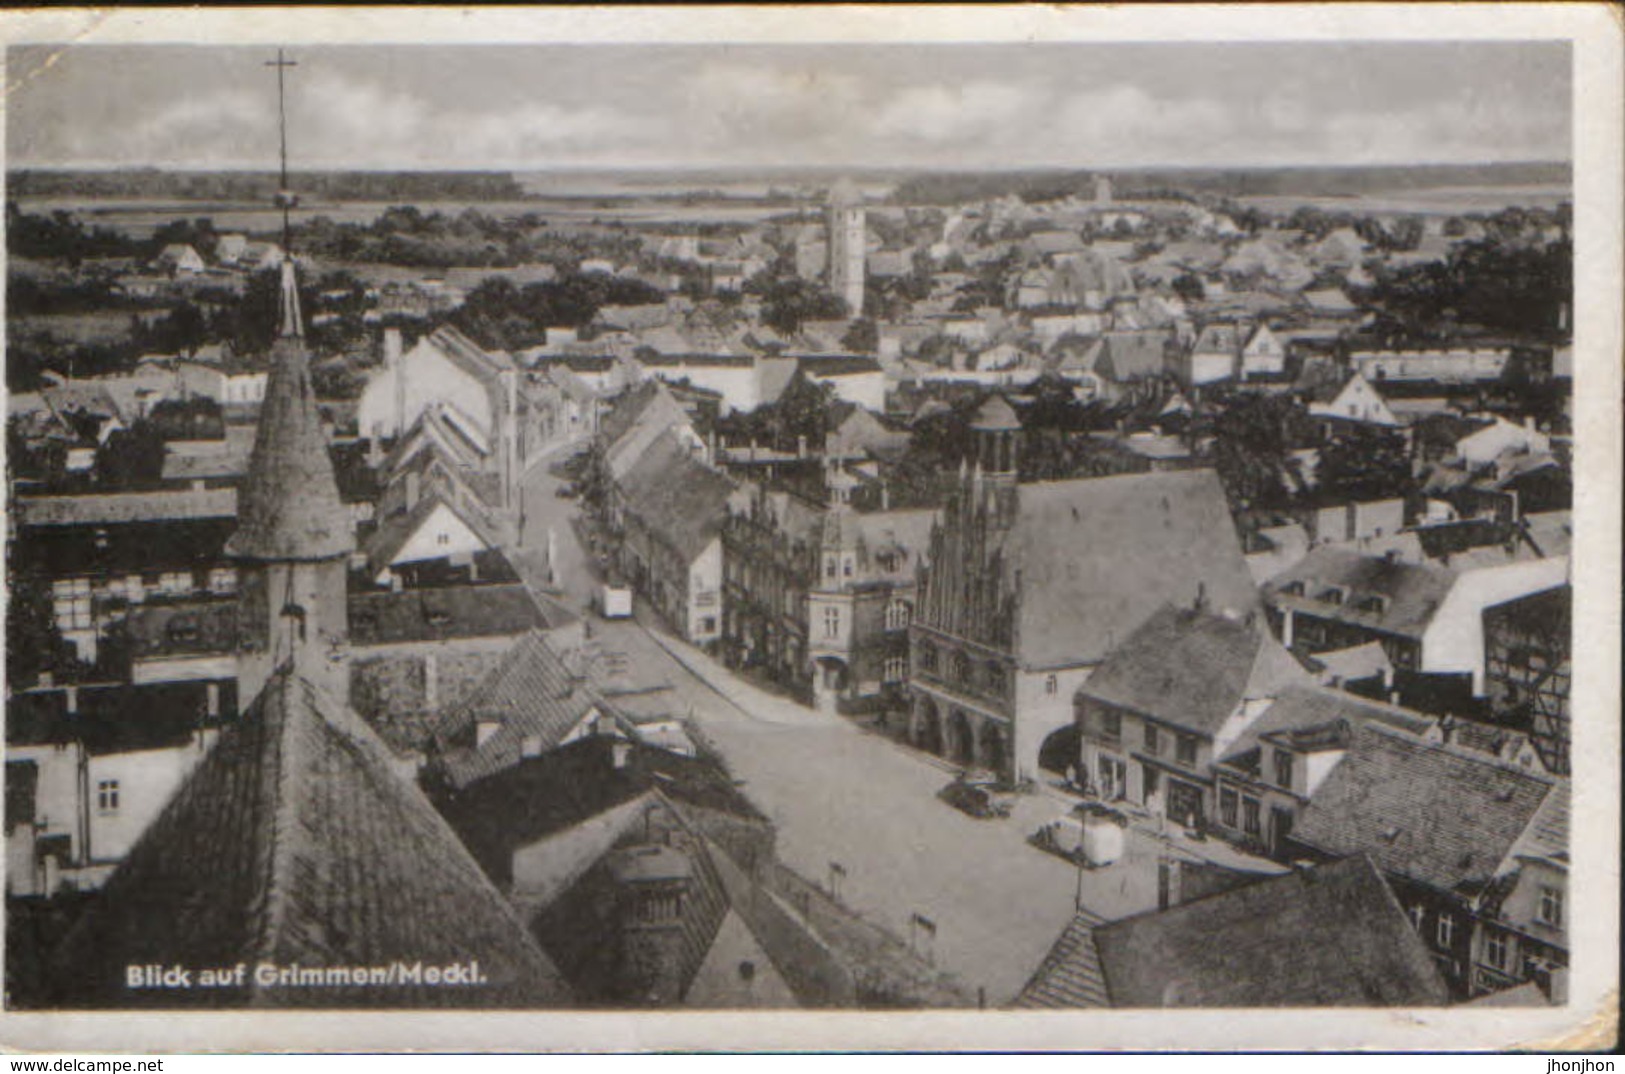 Germany - Postcard Circulated In 1956 - View From Grimmen - 2/scans - Grimmen